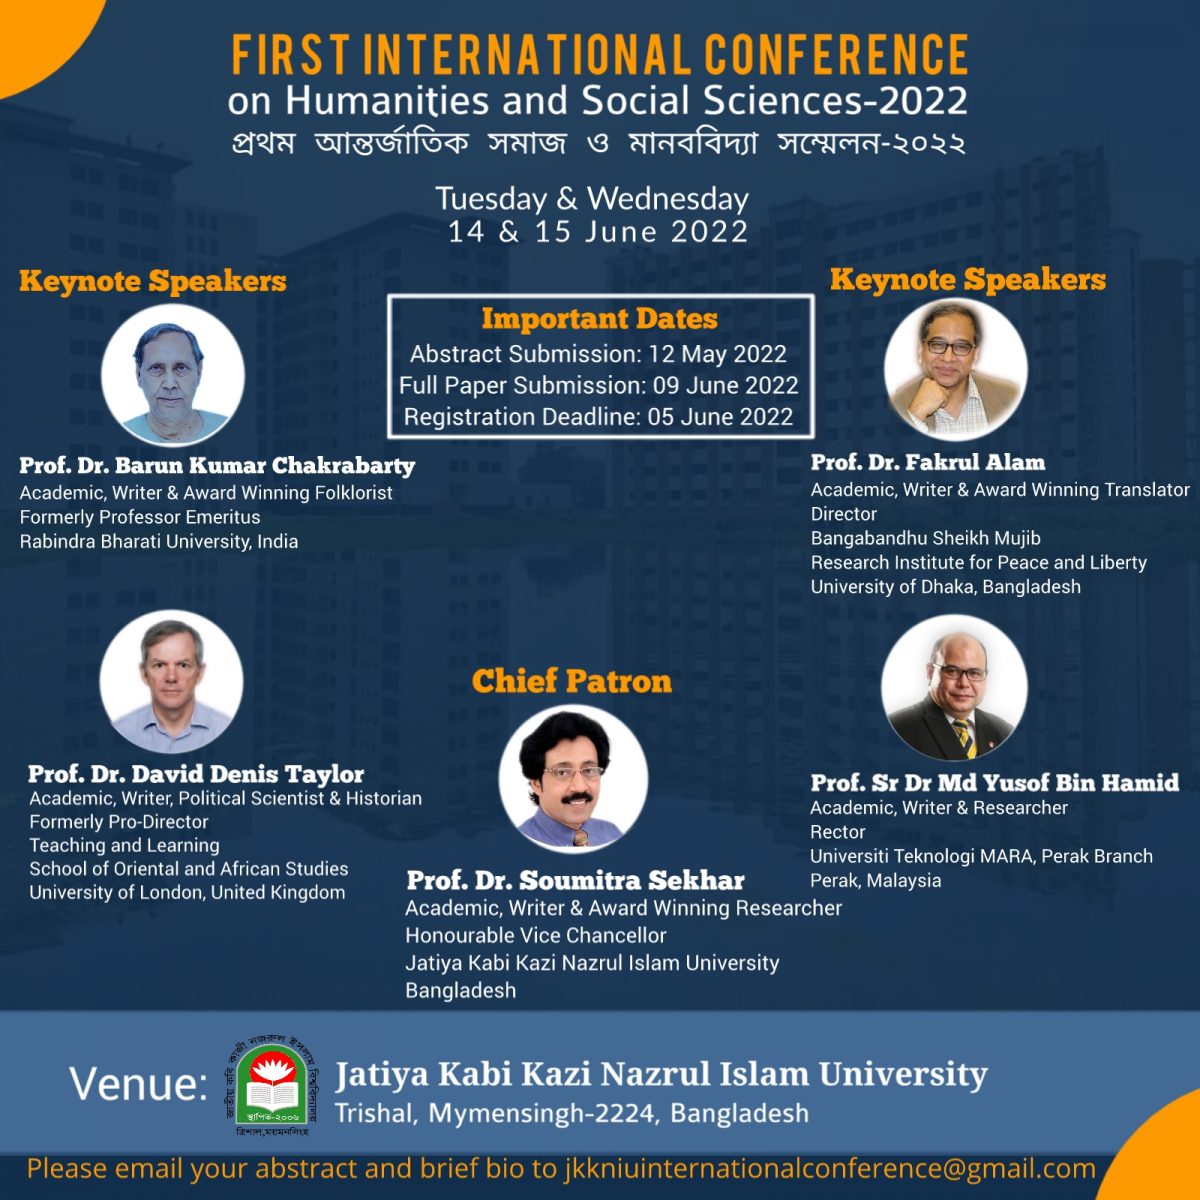 First International Conference on Humanities and Social Sciences, 14-15 June 2022